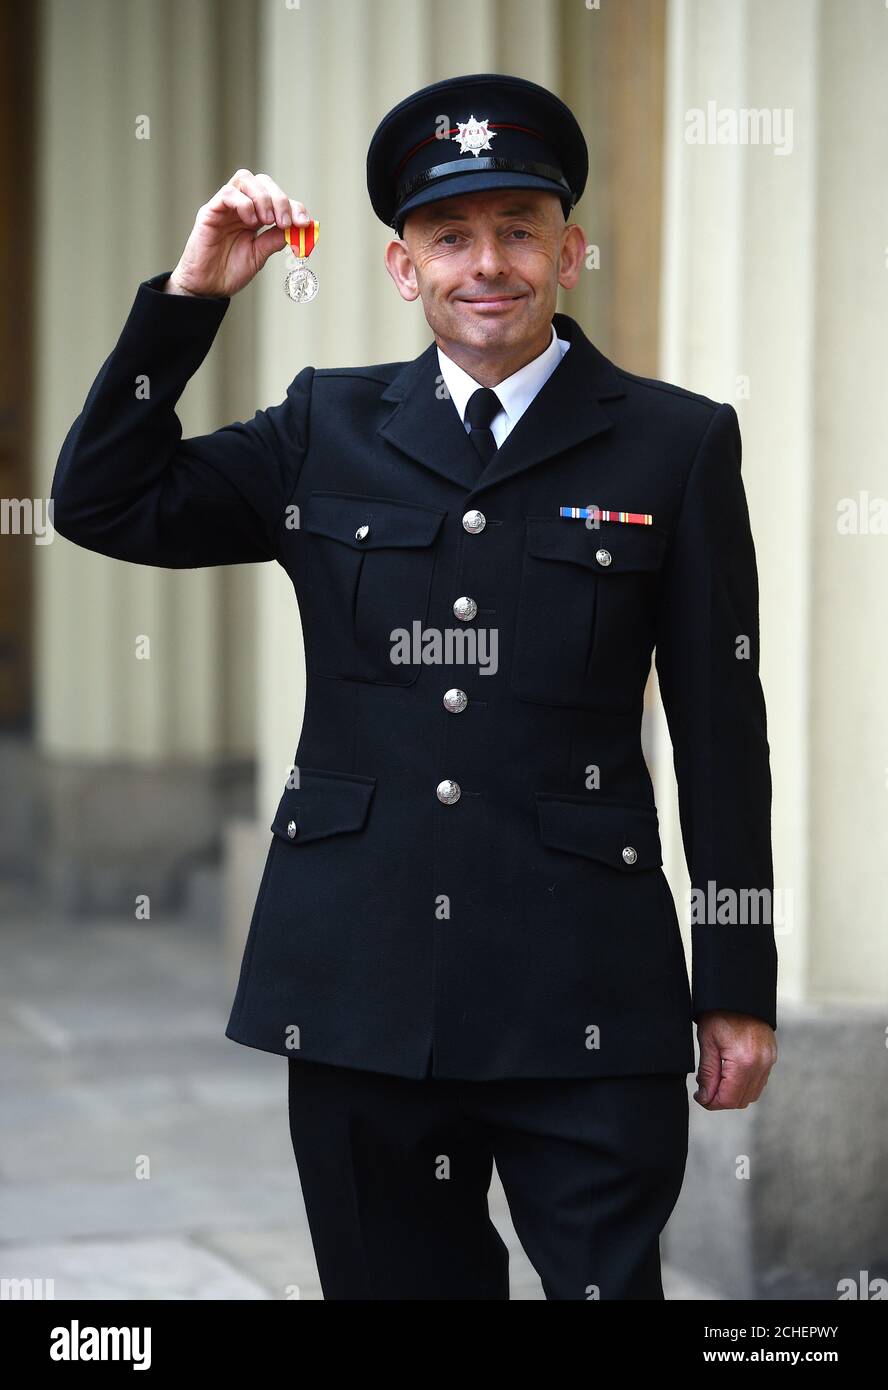 Firefighter Kevin Taylor with the Queen's Fire Service Medal after an investiture ceremony at Buckingham Palace, London. Stock Photo